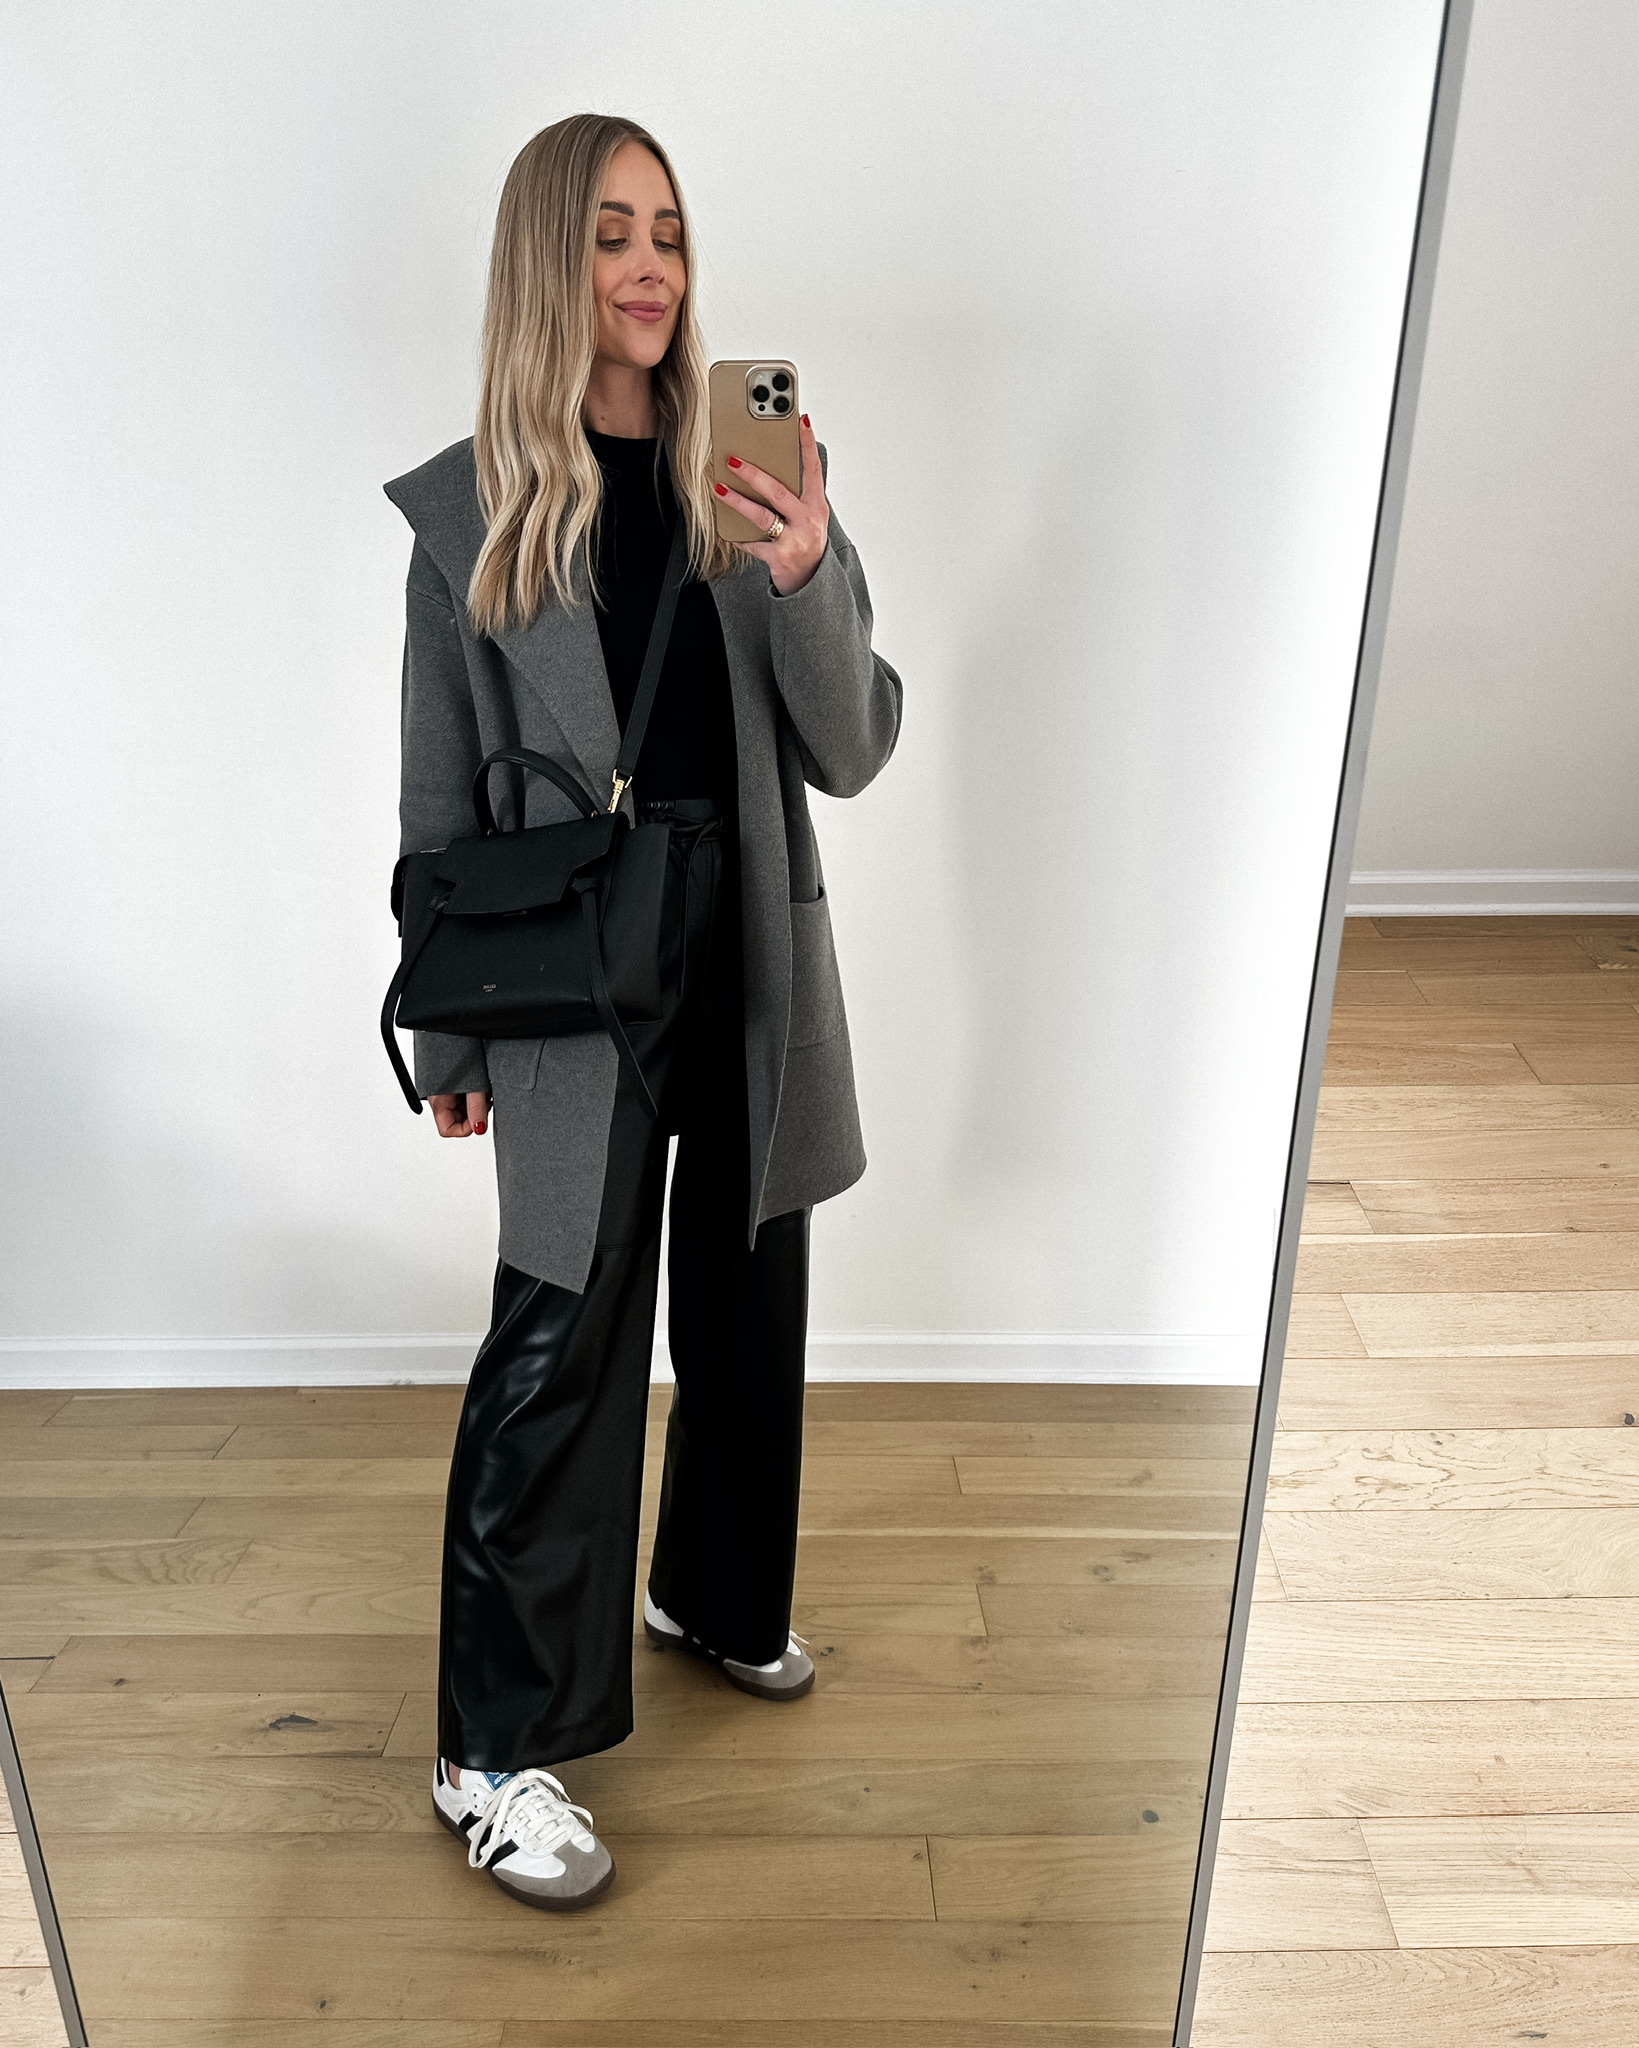 Fashion Jackson wearing MAYSON the label grey coatigan, MAYSON the label vegan leather pants, Adidas Samba sneakers, travel outfit, fall outfit, winter outfit